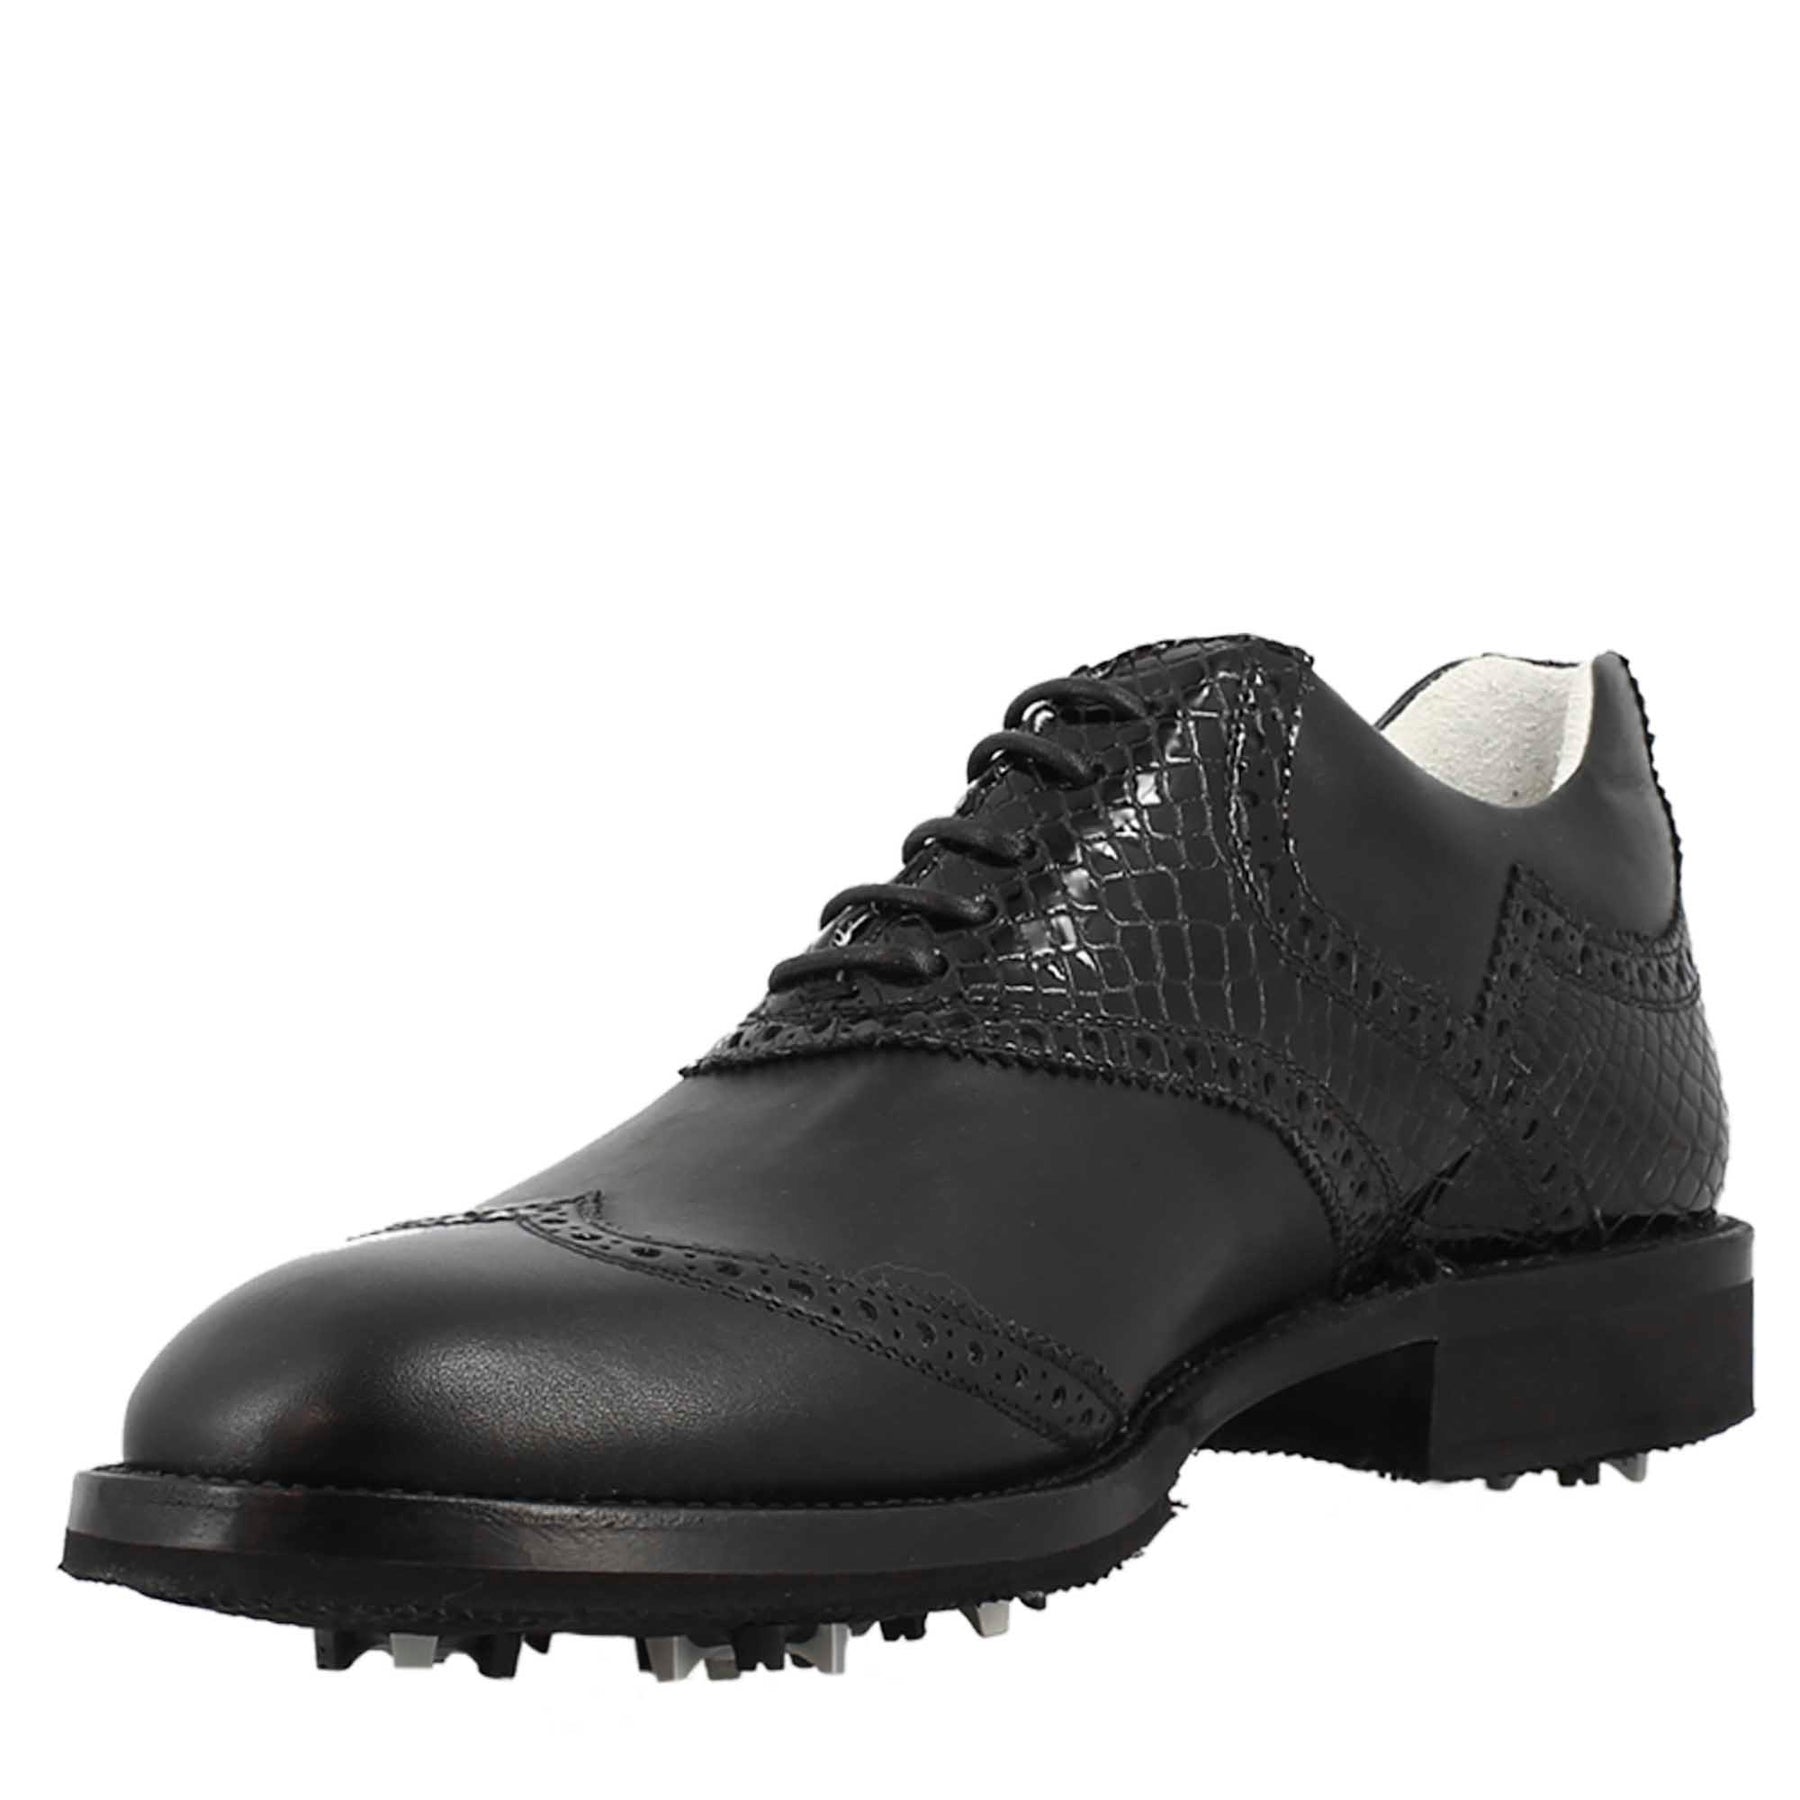 Women's golf shoes black coconut leather handcrafted brogue details